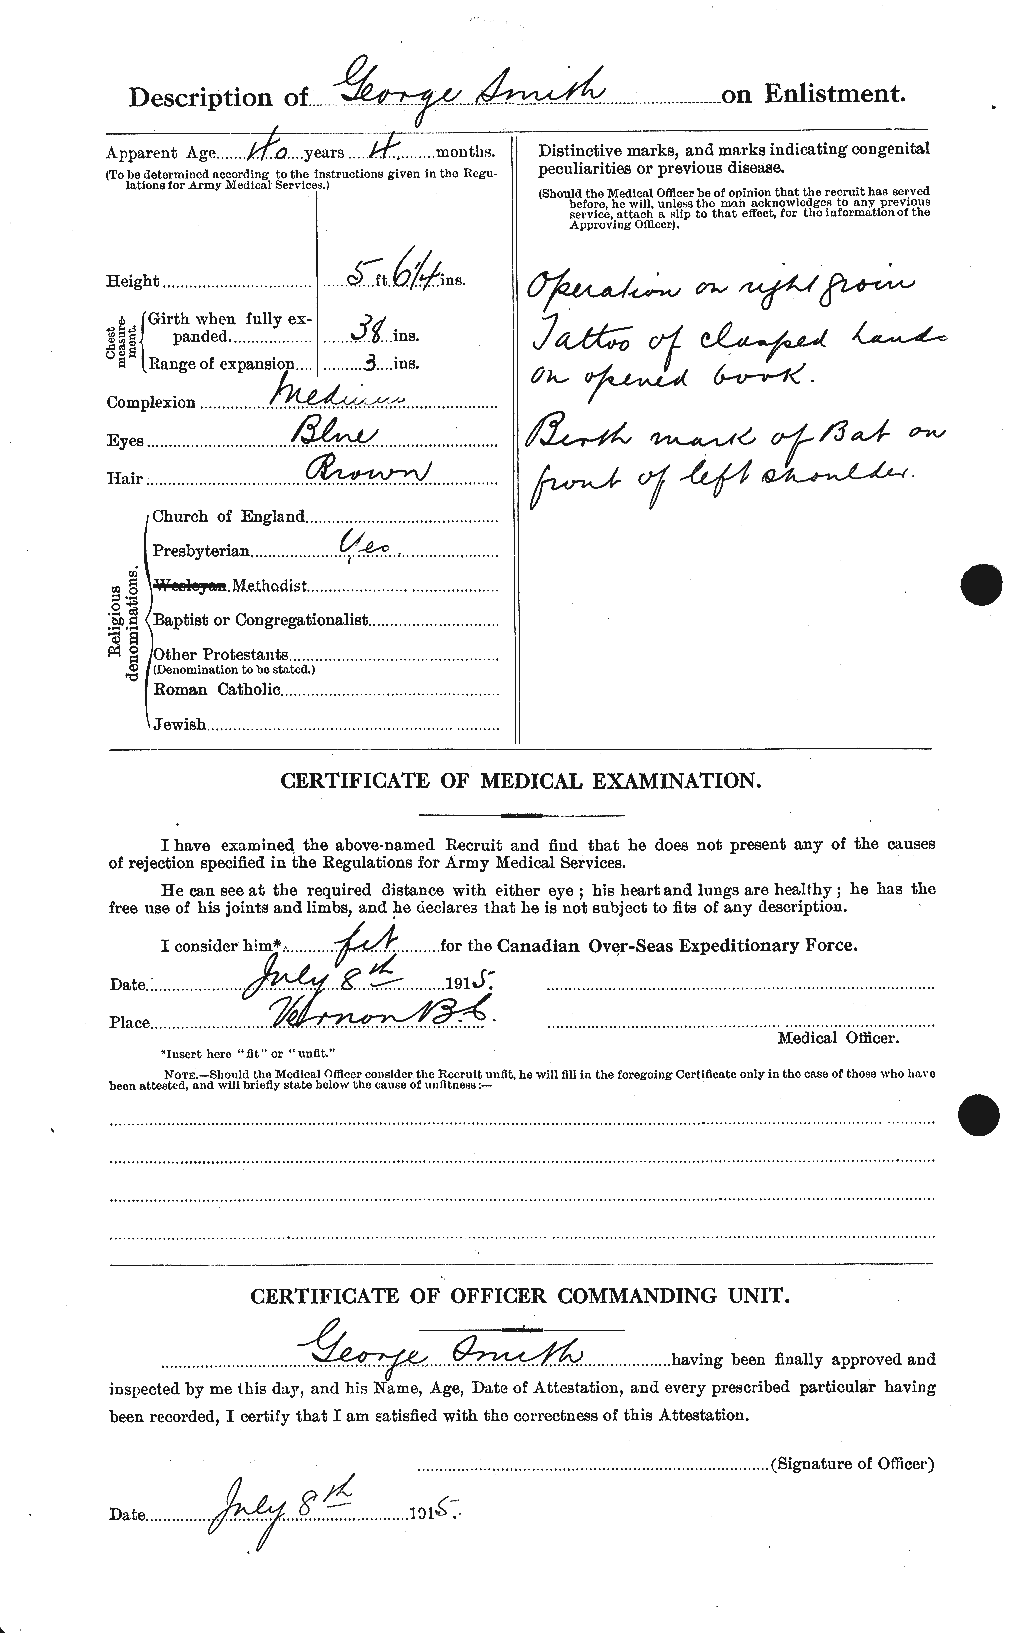 Personnel Records of the First World War - CEF 103161b